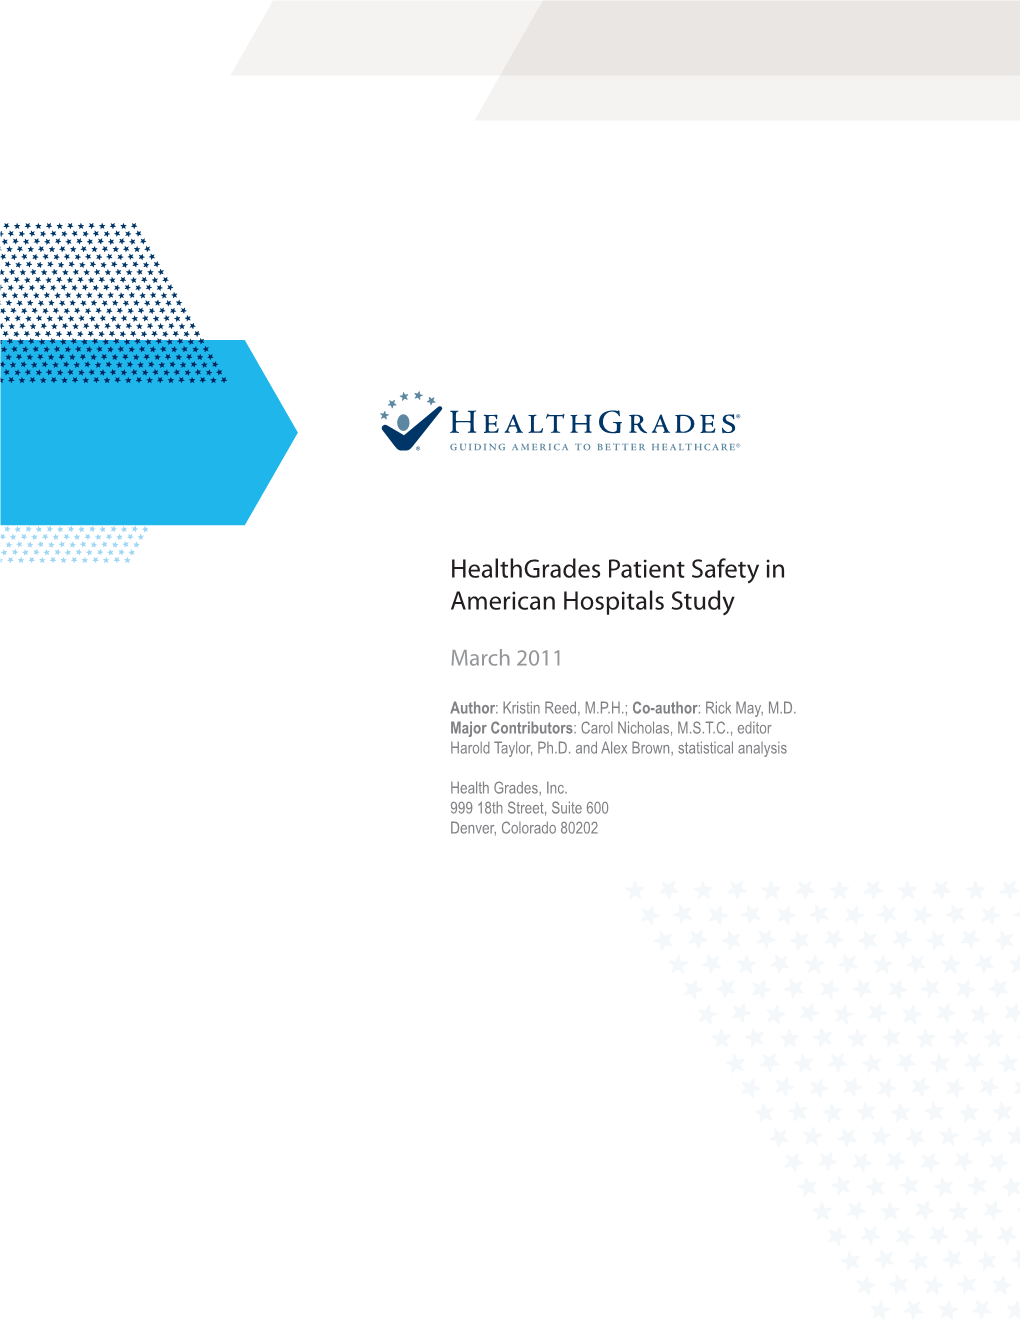 Healthgrades Patient Safety in American Hospitals Study